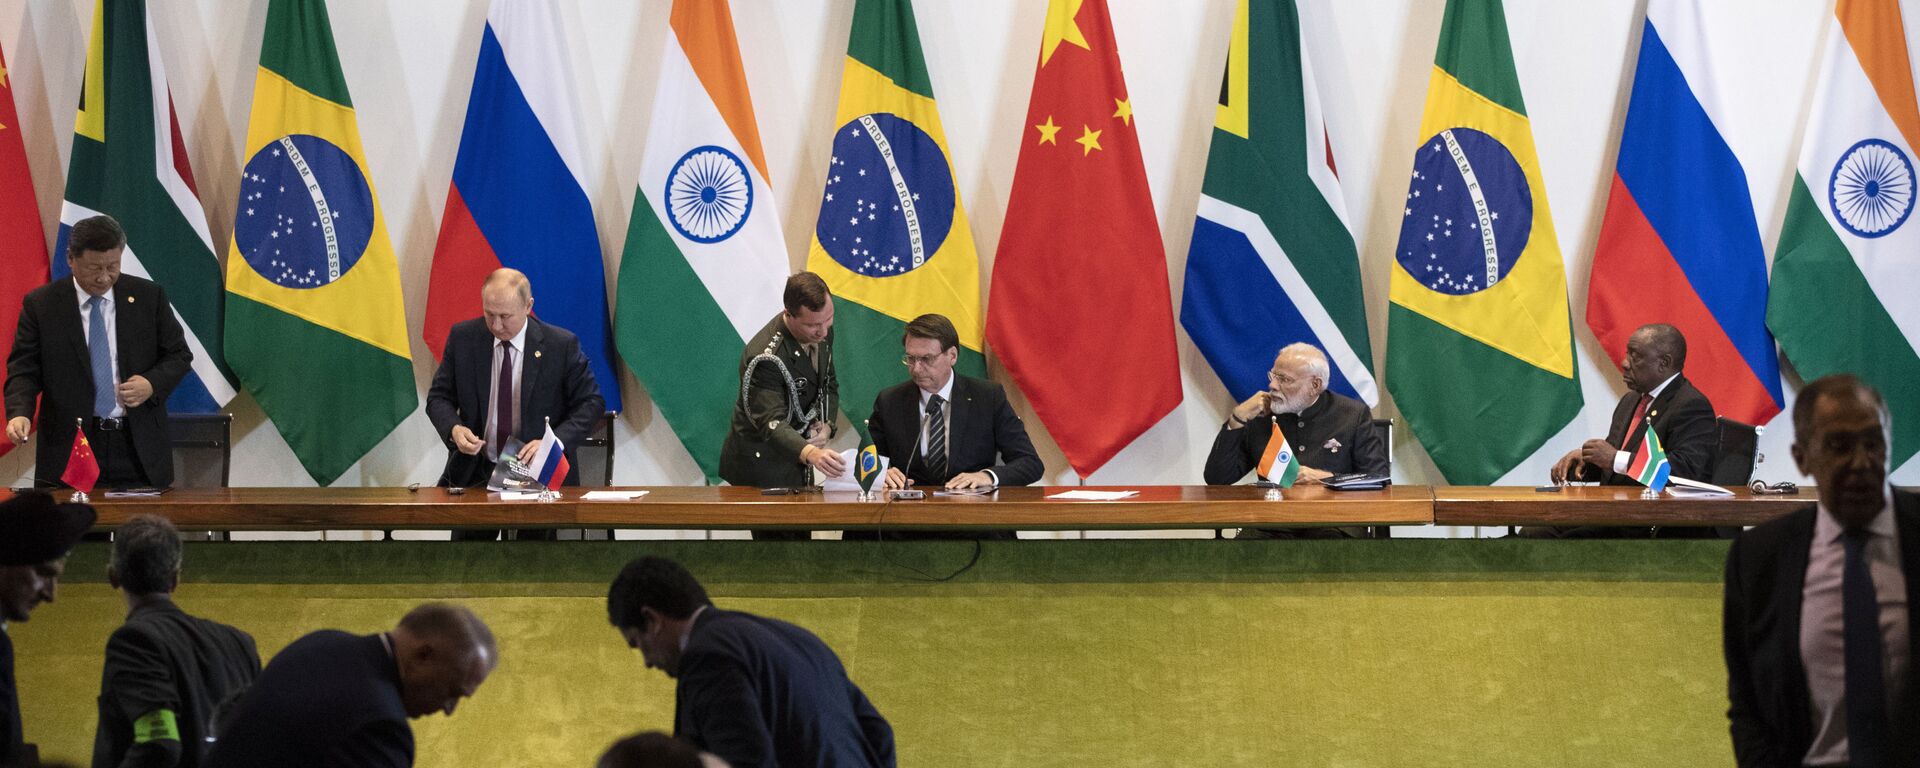 China's President Xi Jinping, left, Russia's President Vladimir Putin, second from left, Brazil's President Jair Bolsonaro, center, India's Prime Minister Narendra Modi, second from right, and South Africa's President Cyril Ramaphosa leave after a meeting with members of the Business Council and management of the New Development Bank during the BRICS emerging economies at the Itamaraty palace in Brasilia, Brazil, Thursday, Nov. 14, 2019. - Sputnik भारत, 1920, 28.05.2023